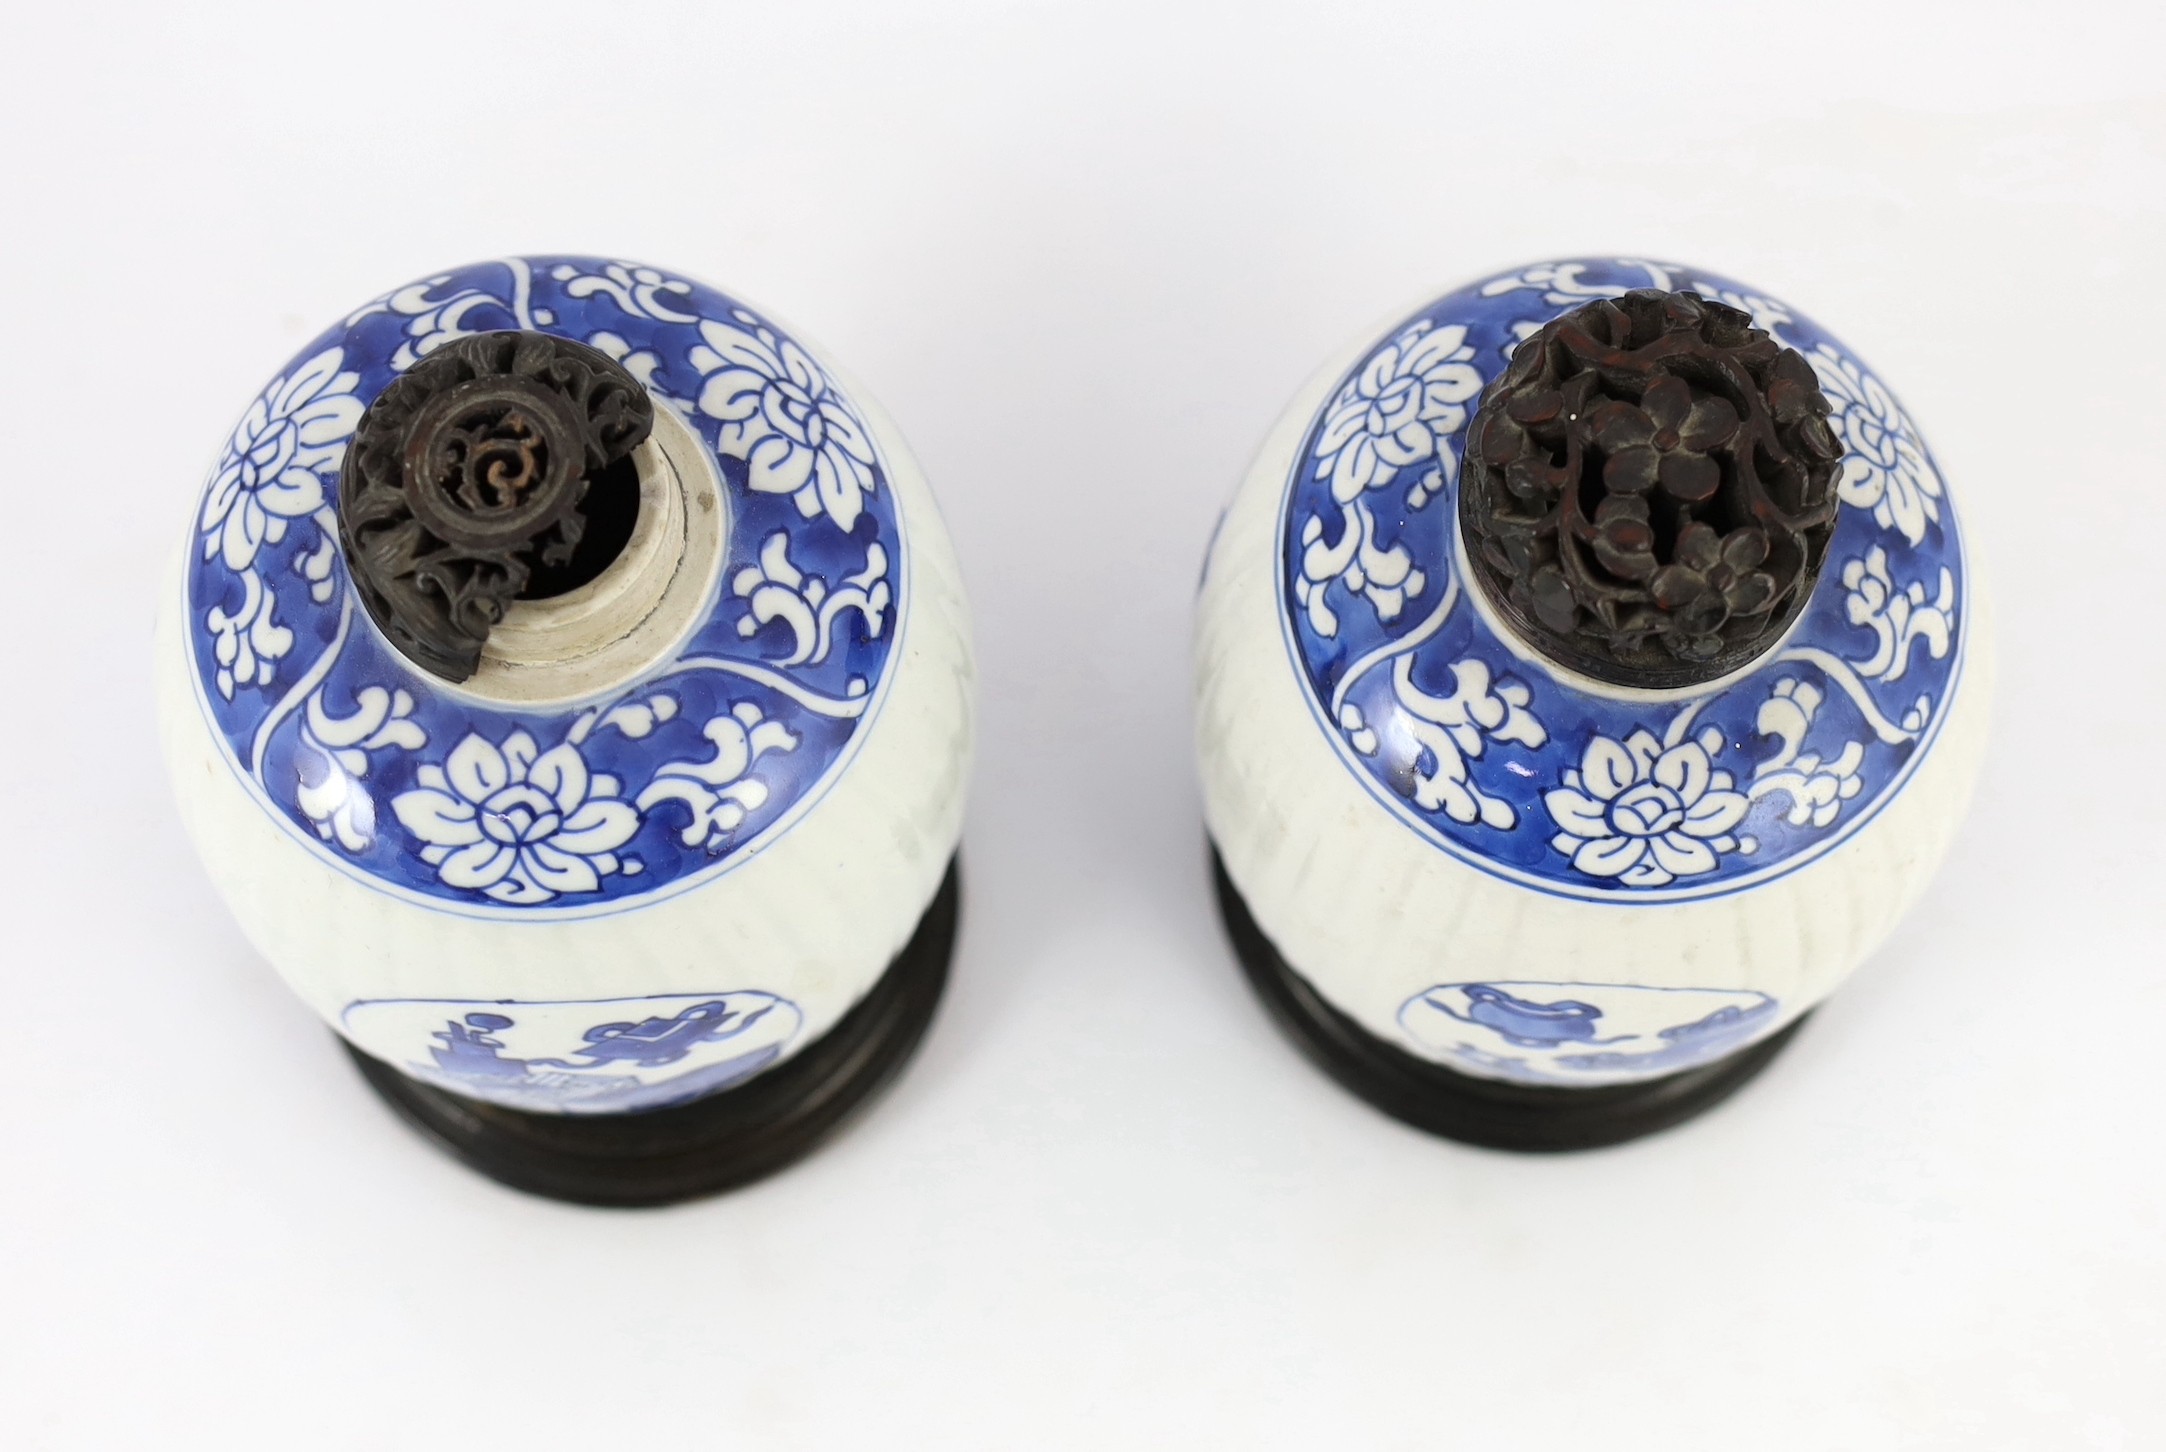 A pair of Chinese blue and white ribbed ovoid jars, Kangxi period, 13.4cm high, excluding wood stand and cover, one chipped with hairline crack